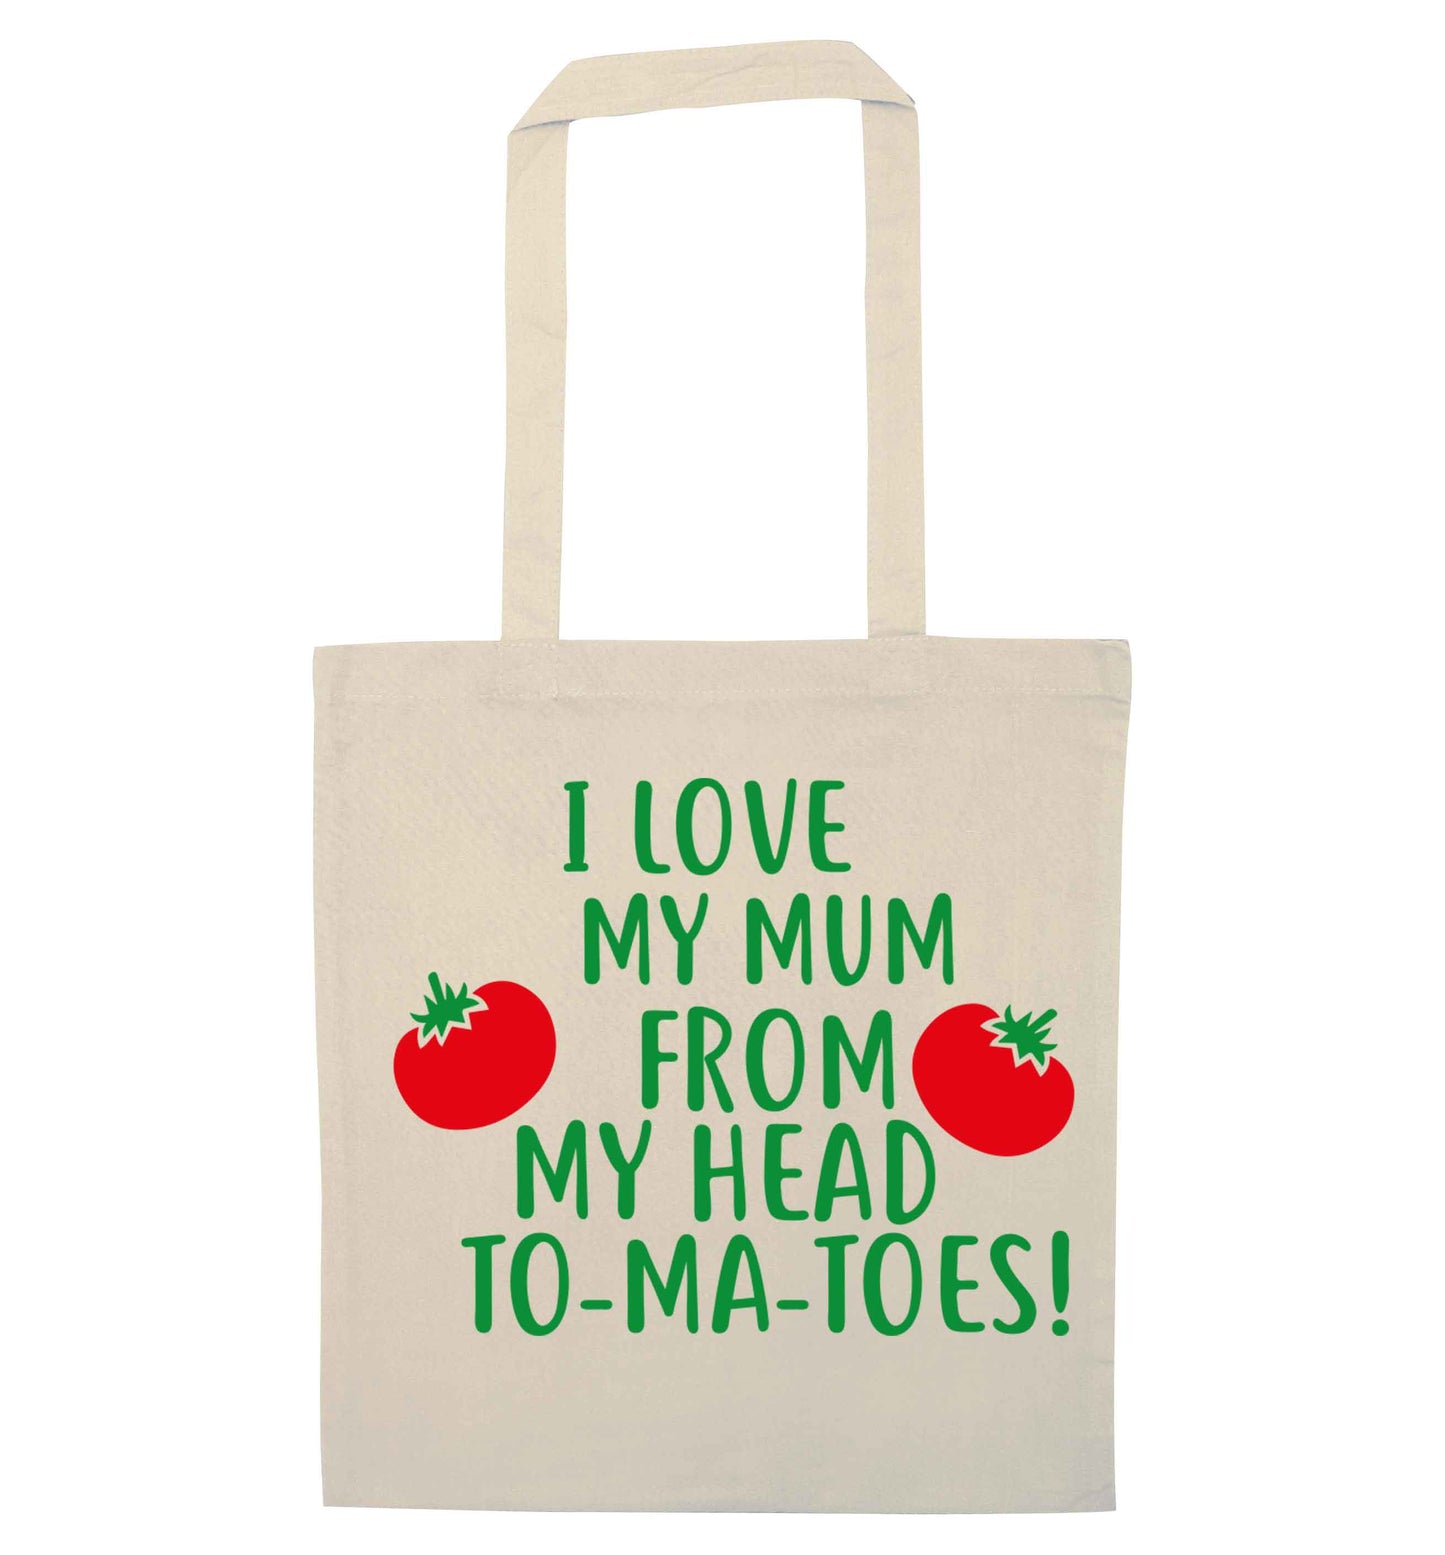 I love my mum from my head to-my-toes! natural tote bag